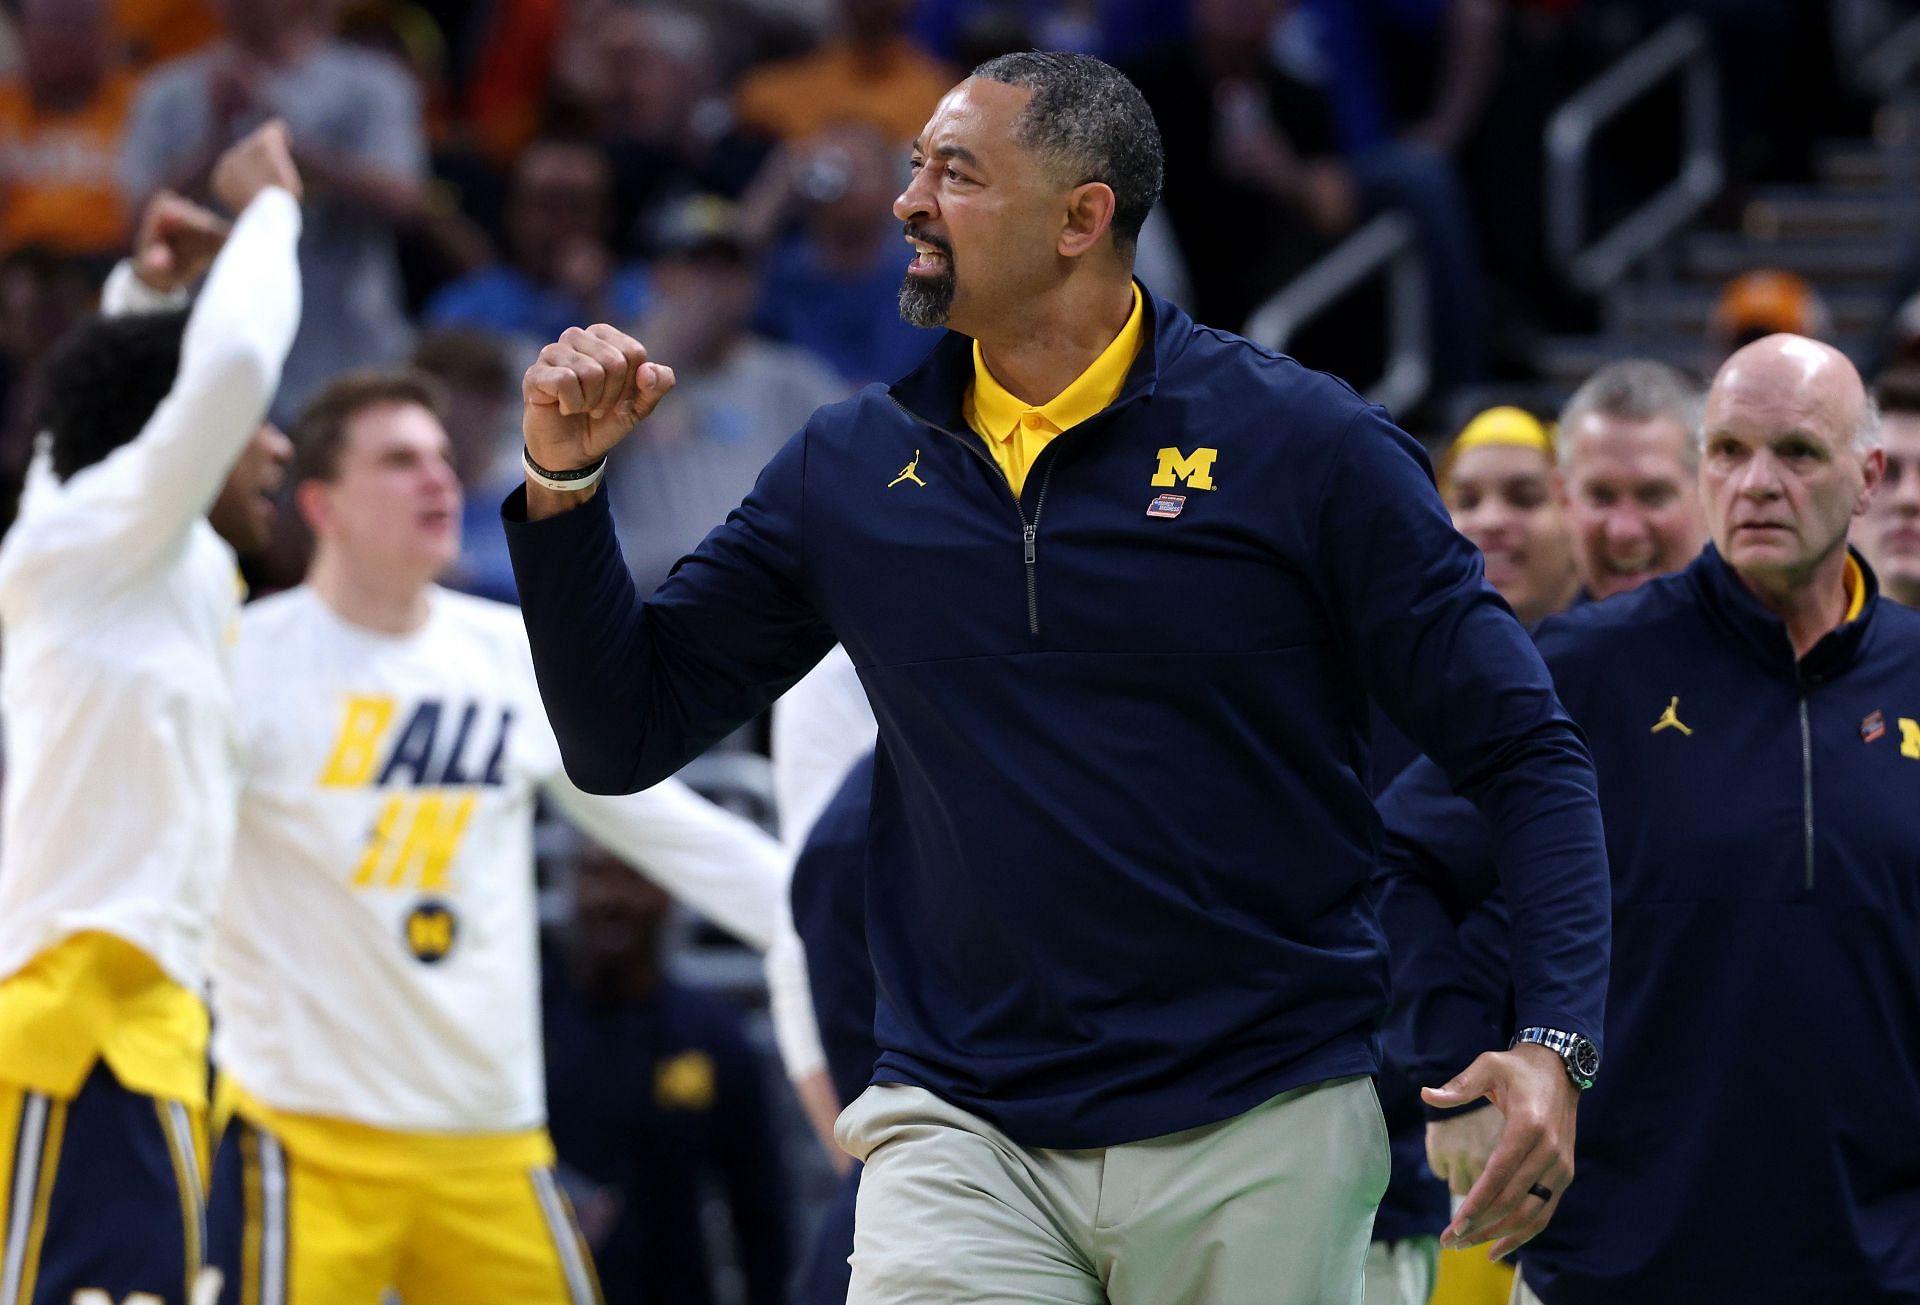 Michigan Wolverines have started to find their rhythm again